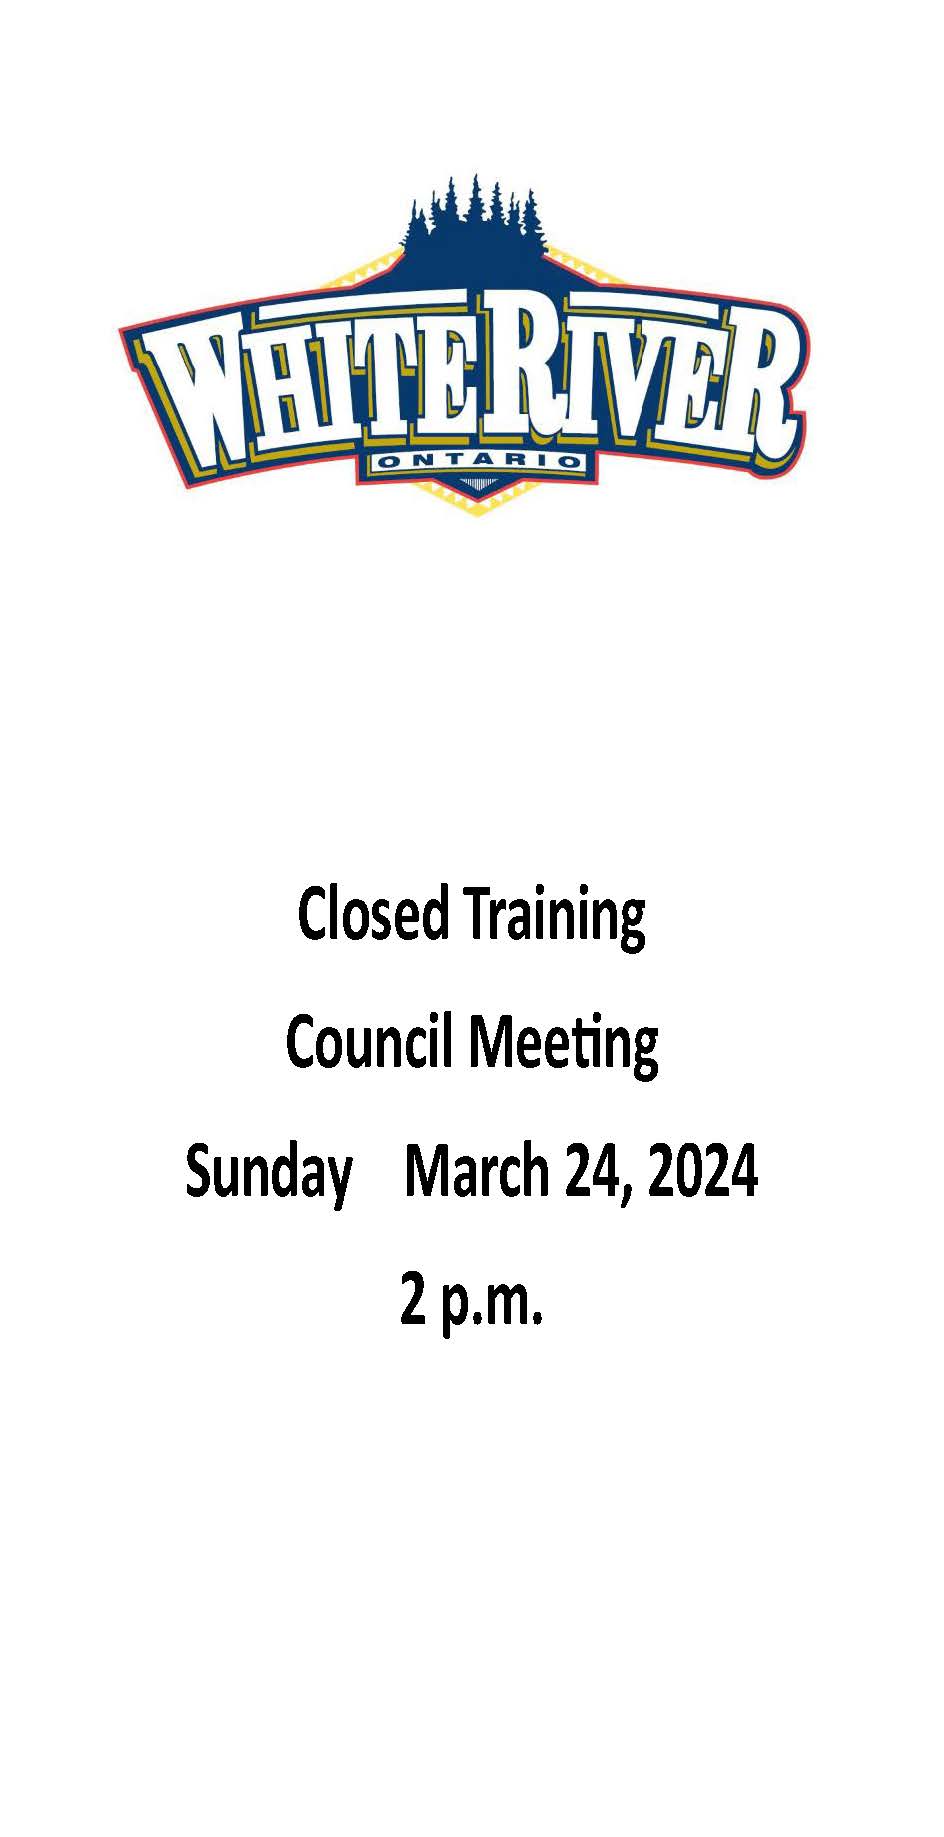 Closed Training Council Meeting